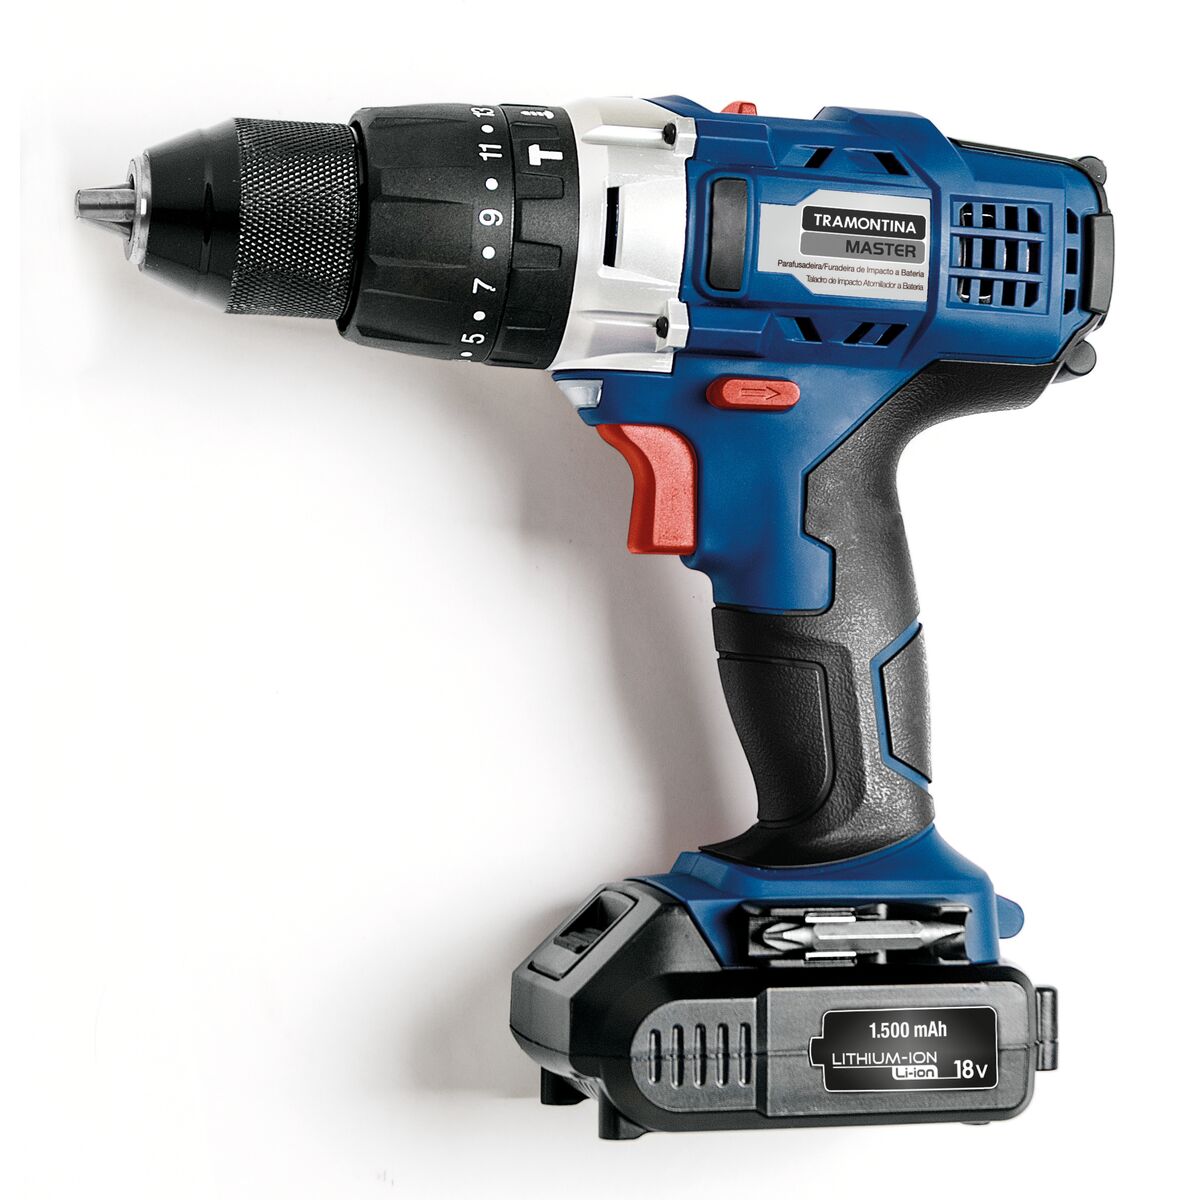 Tramontina MASTER 18 V Lithium Impact Drill and Driver with adjustable speed, reverse system and box